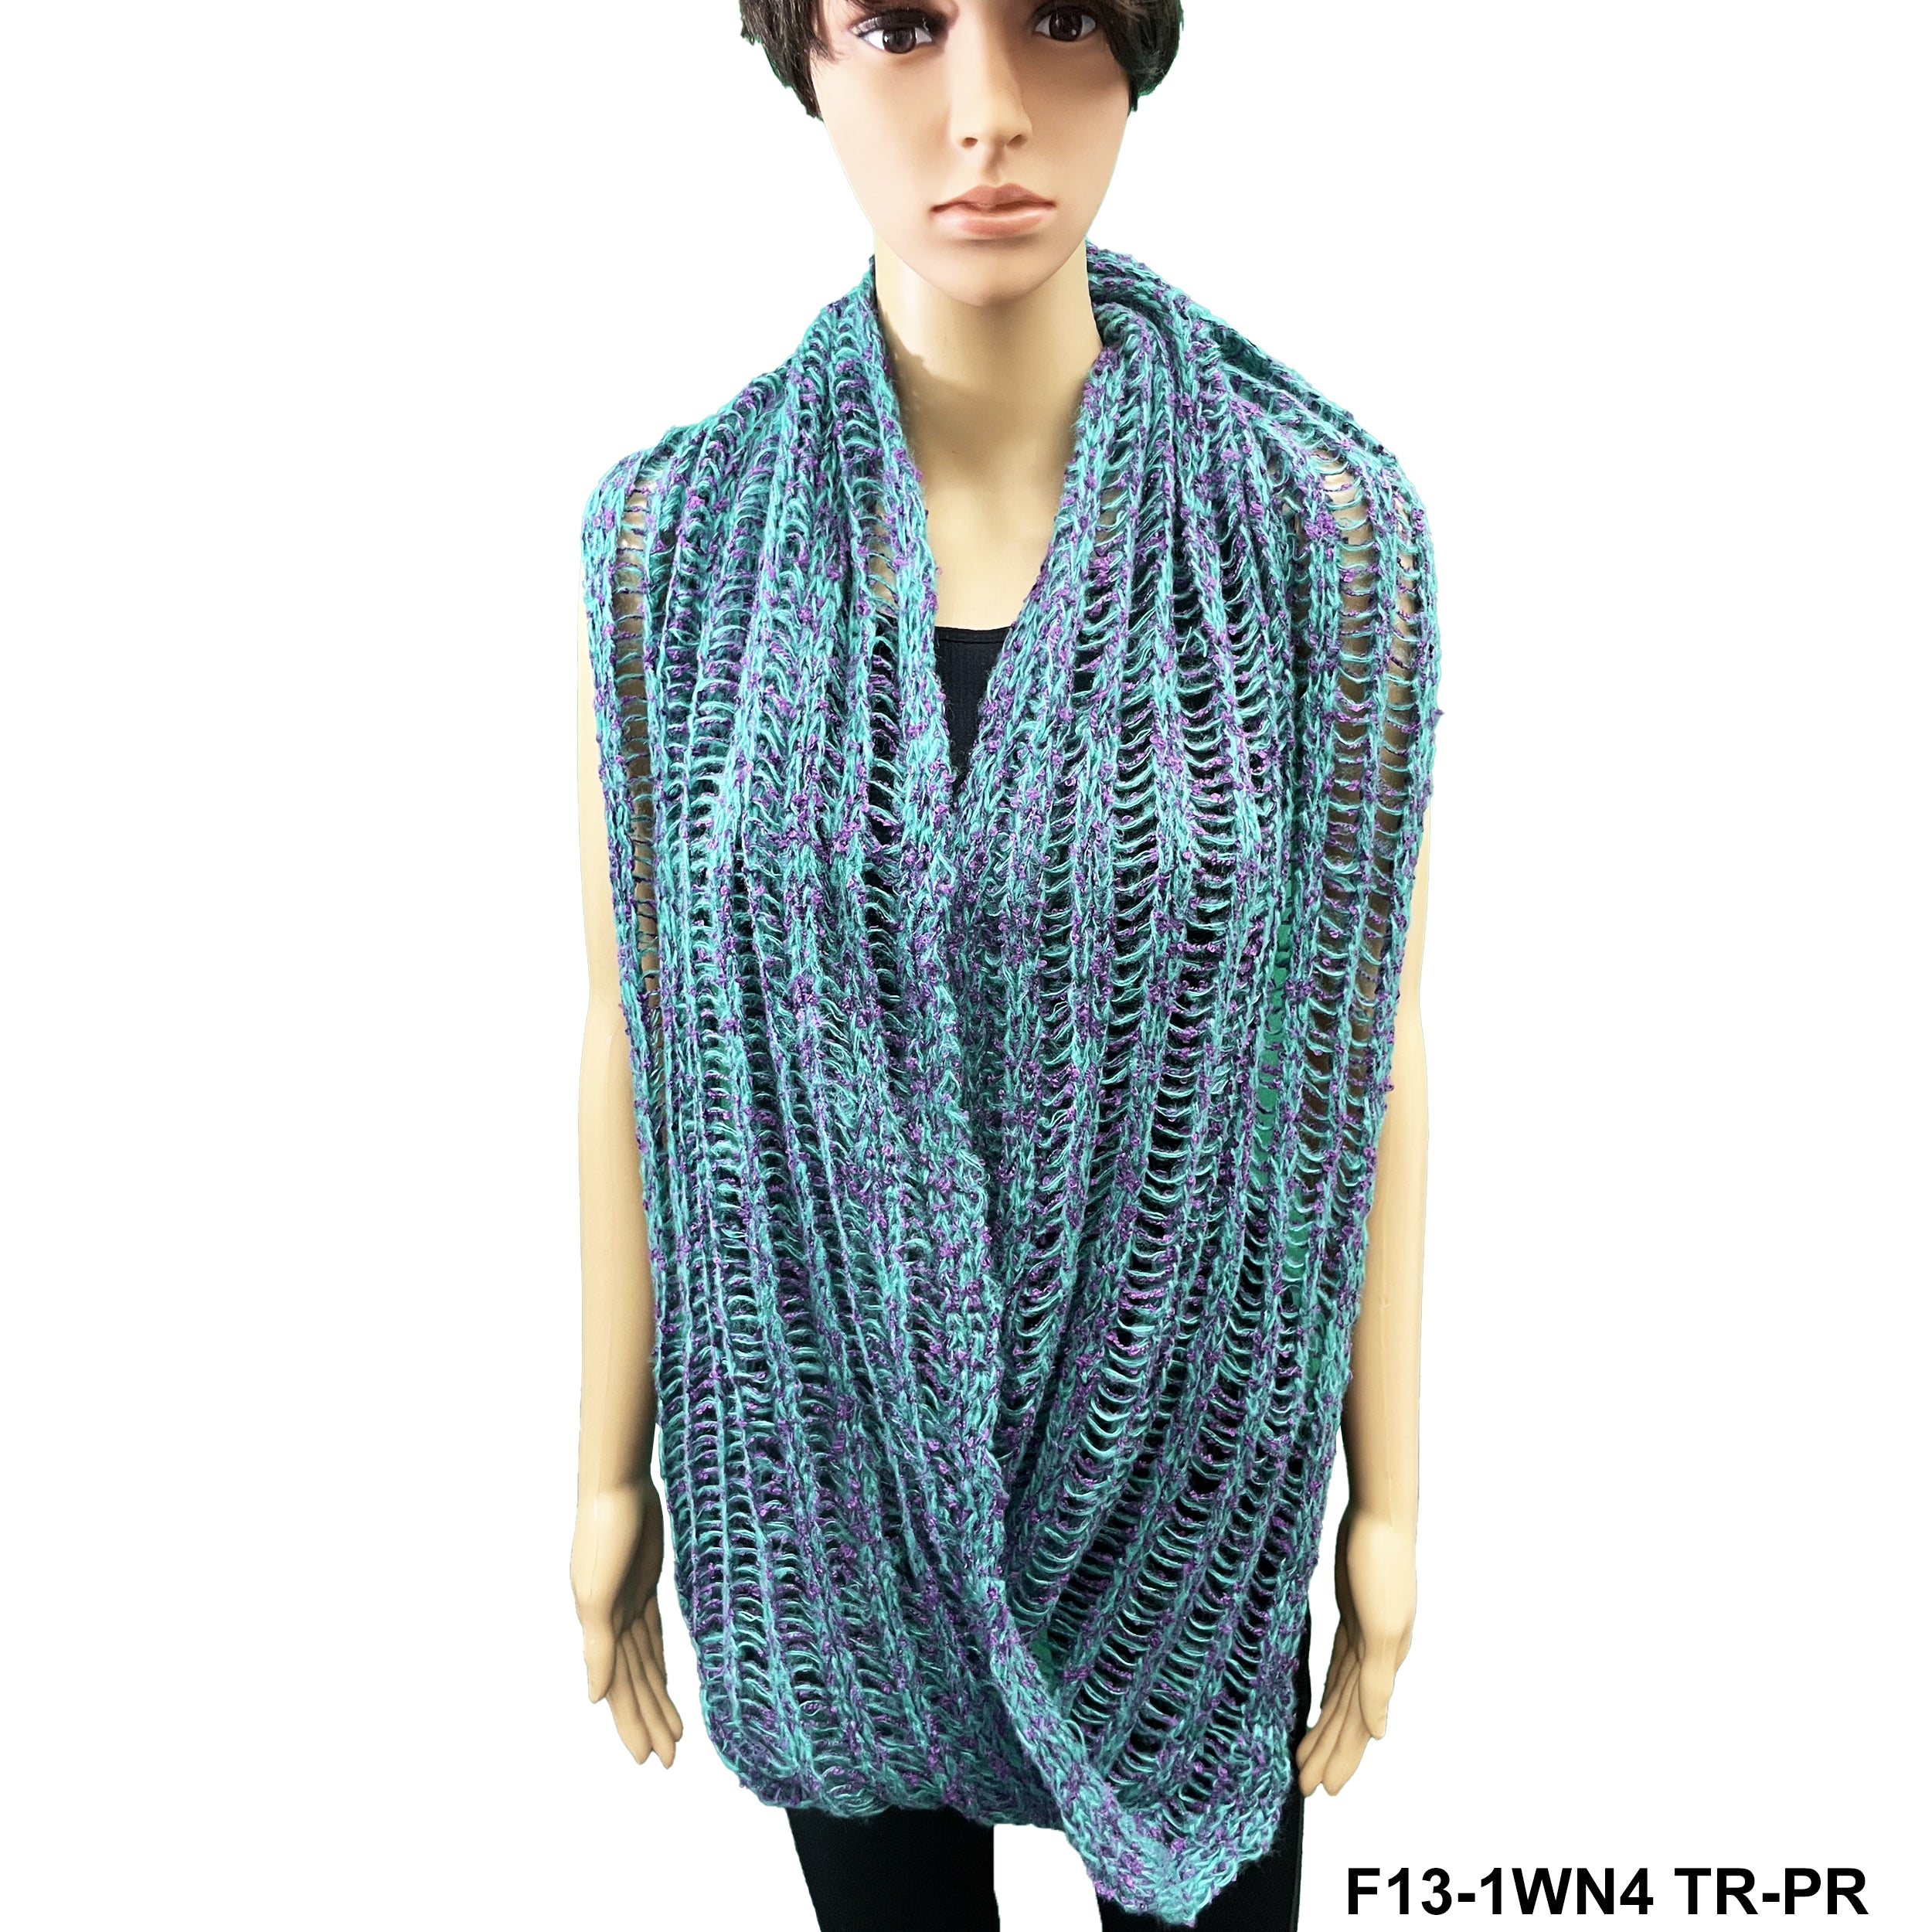 Infinity Loosely Knitted Scarf F13-1WN4 TR-PR